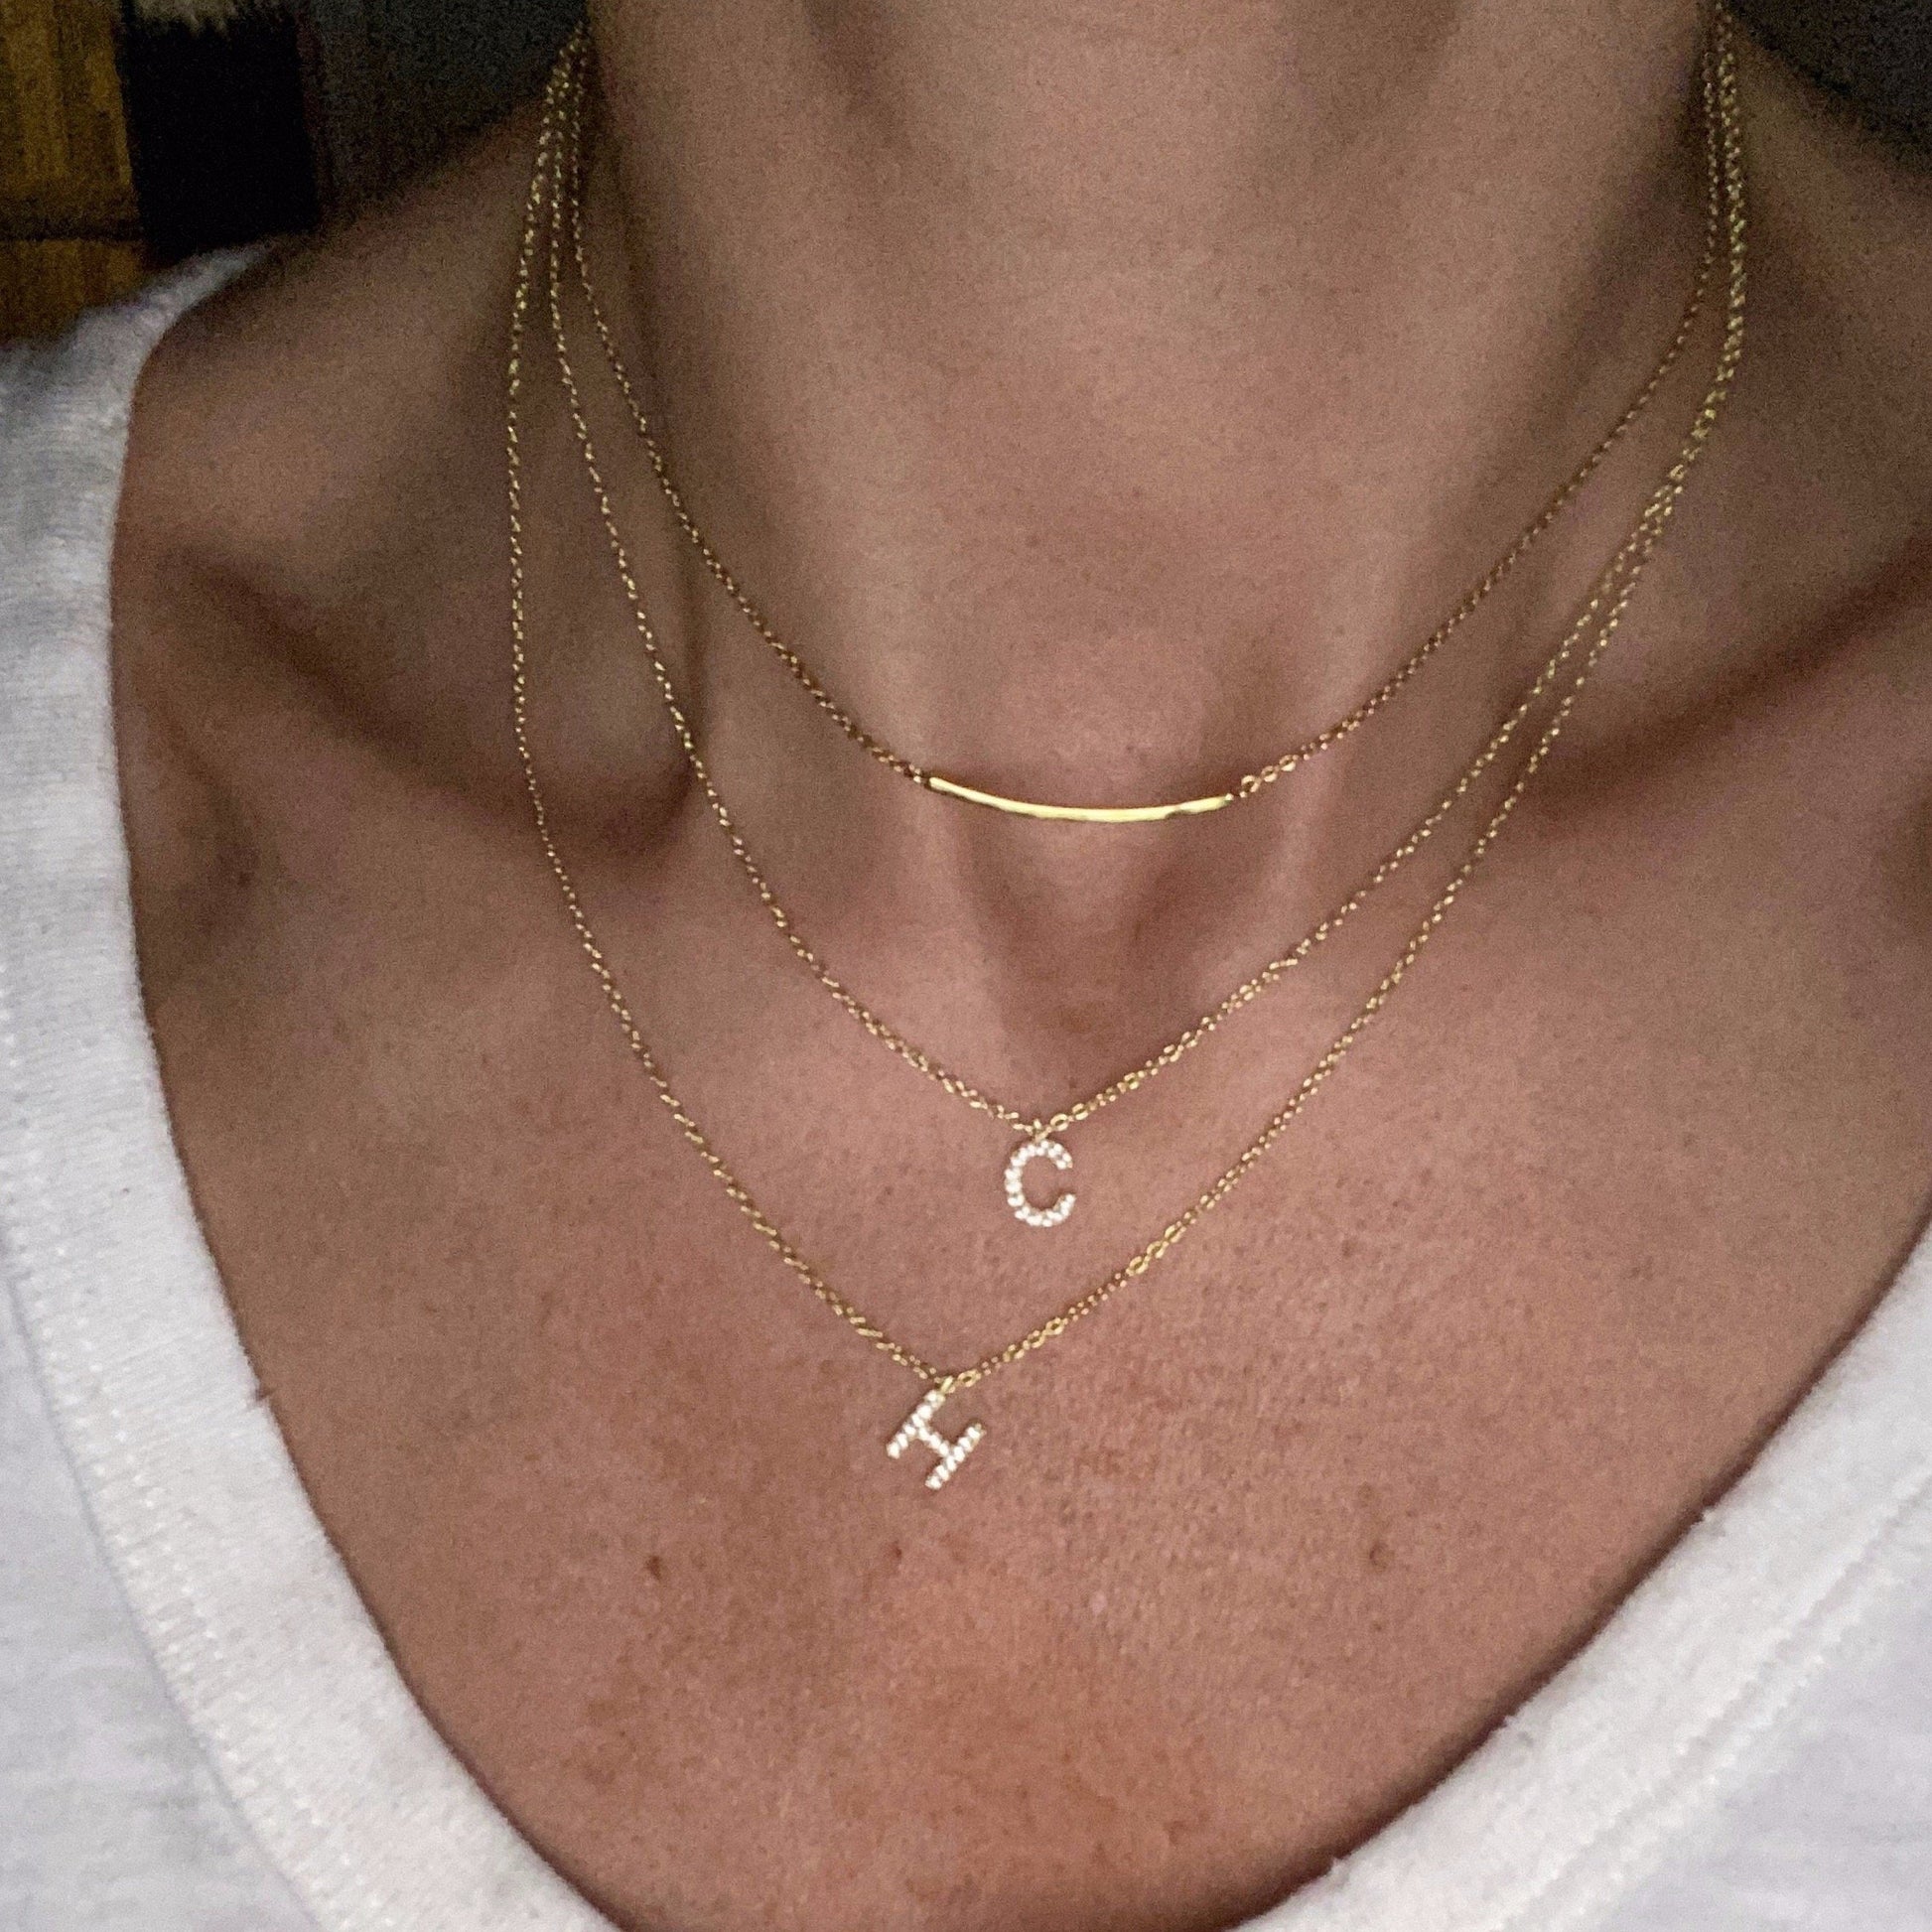 Custom Letter Necklace Sideways Initials Necklace 